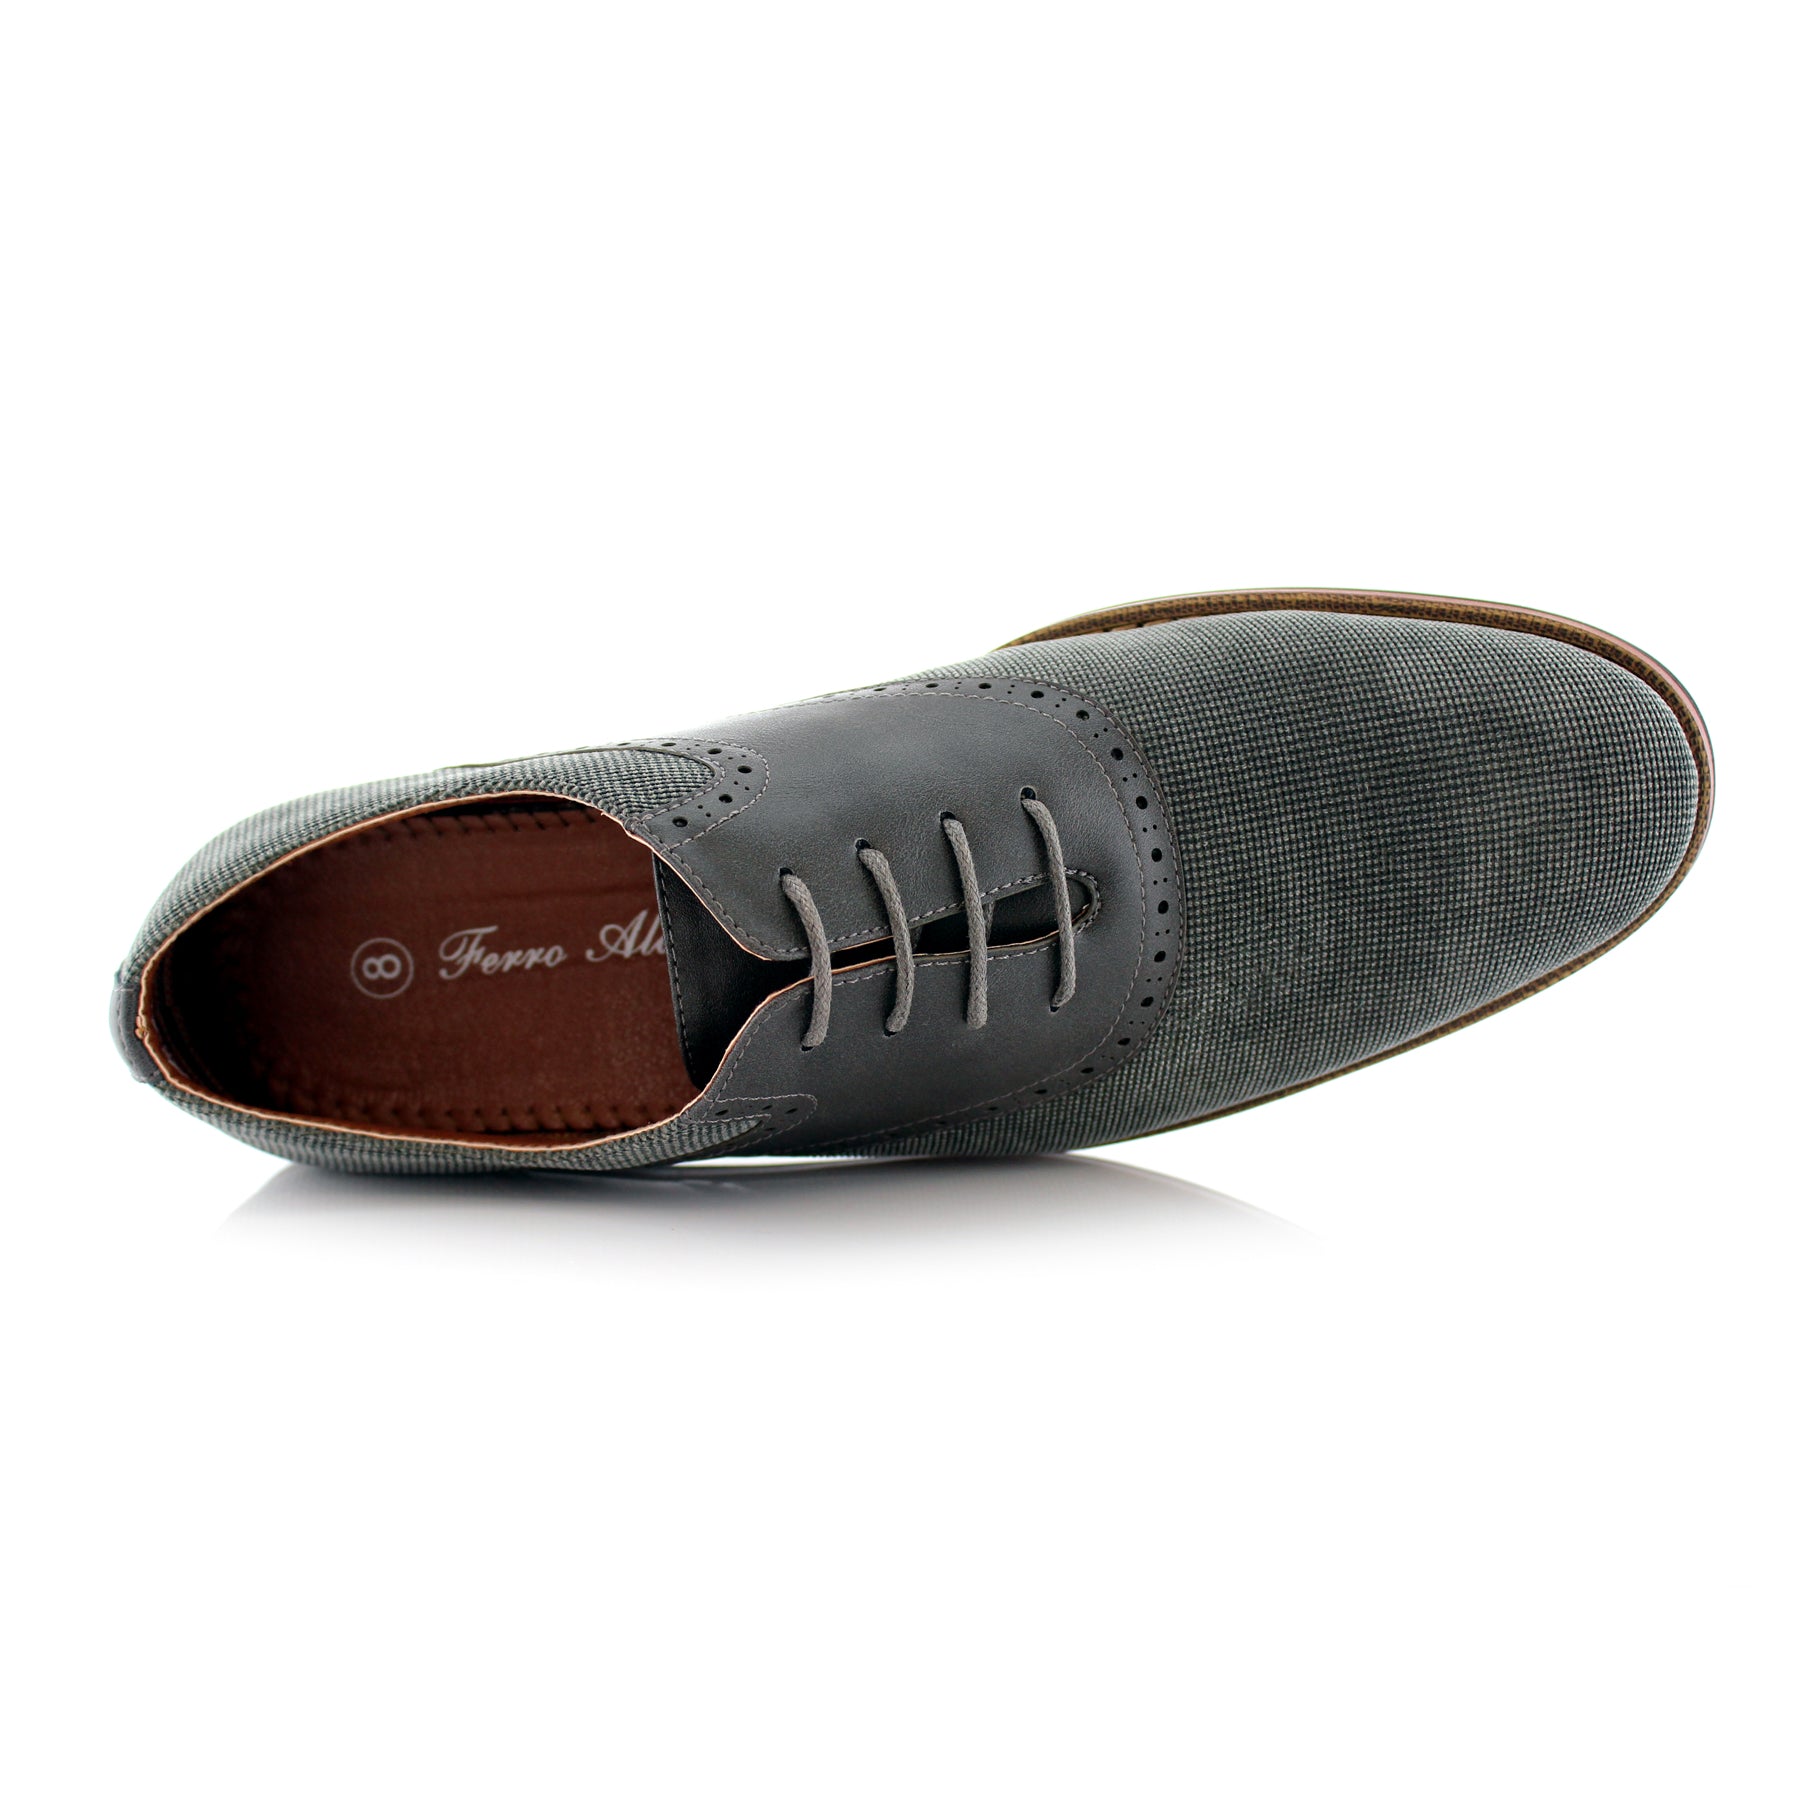 Duo-Textured Velvet Oxfords | Baxter by Ferro Aldo | Conal Footwear | Top-Down Angle View